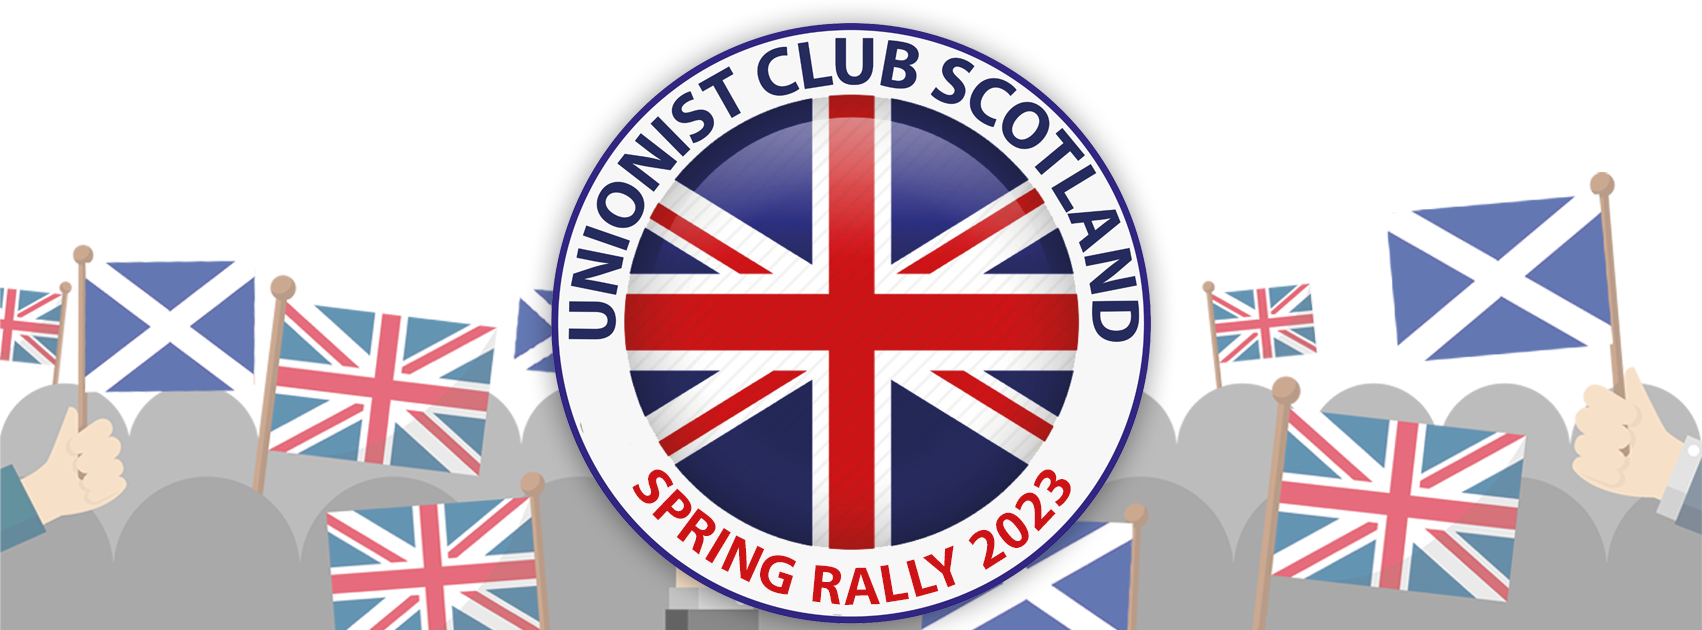 Unionists Club's Spring Rally - Together UK Foundation